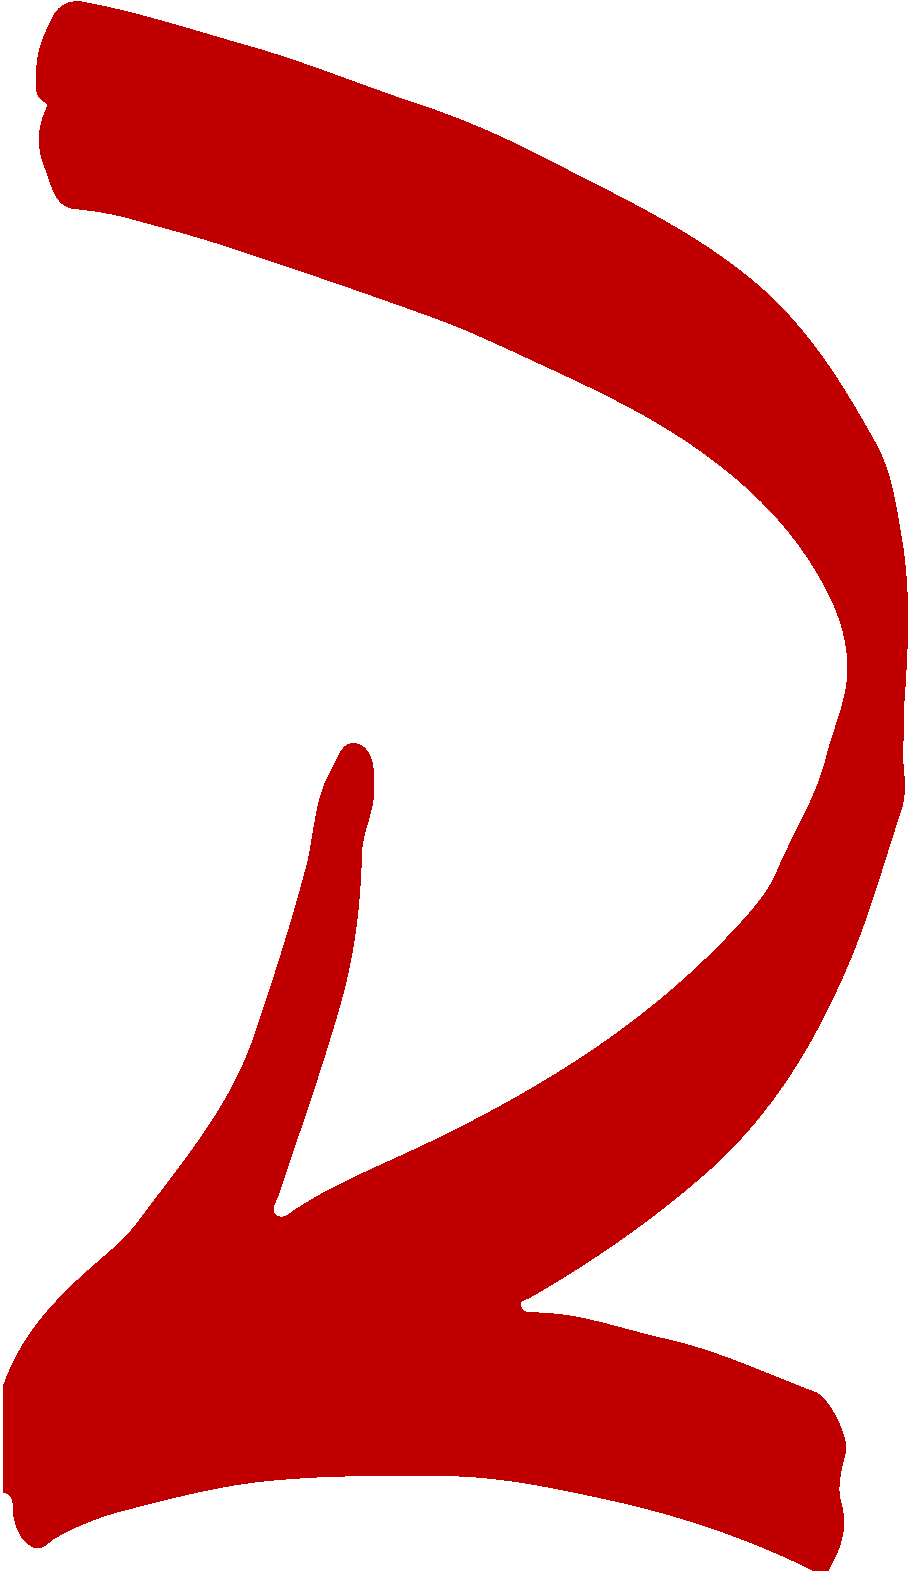 Curved Arrow Drawn Parallel To Curved Line - Curved Arrow Pointing Down (908x1571)